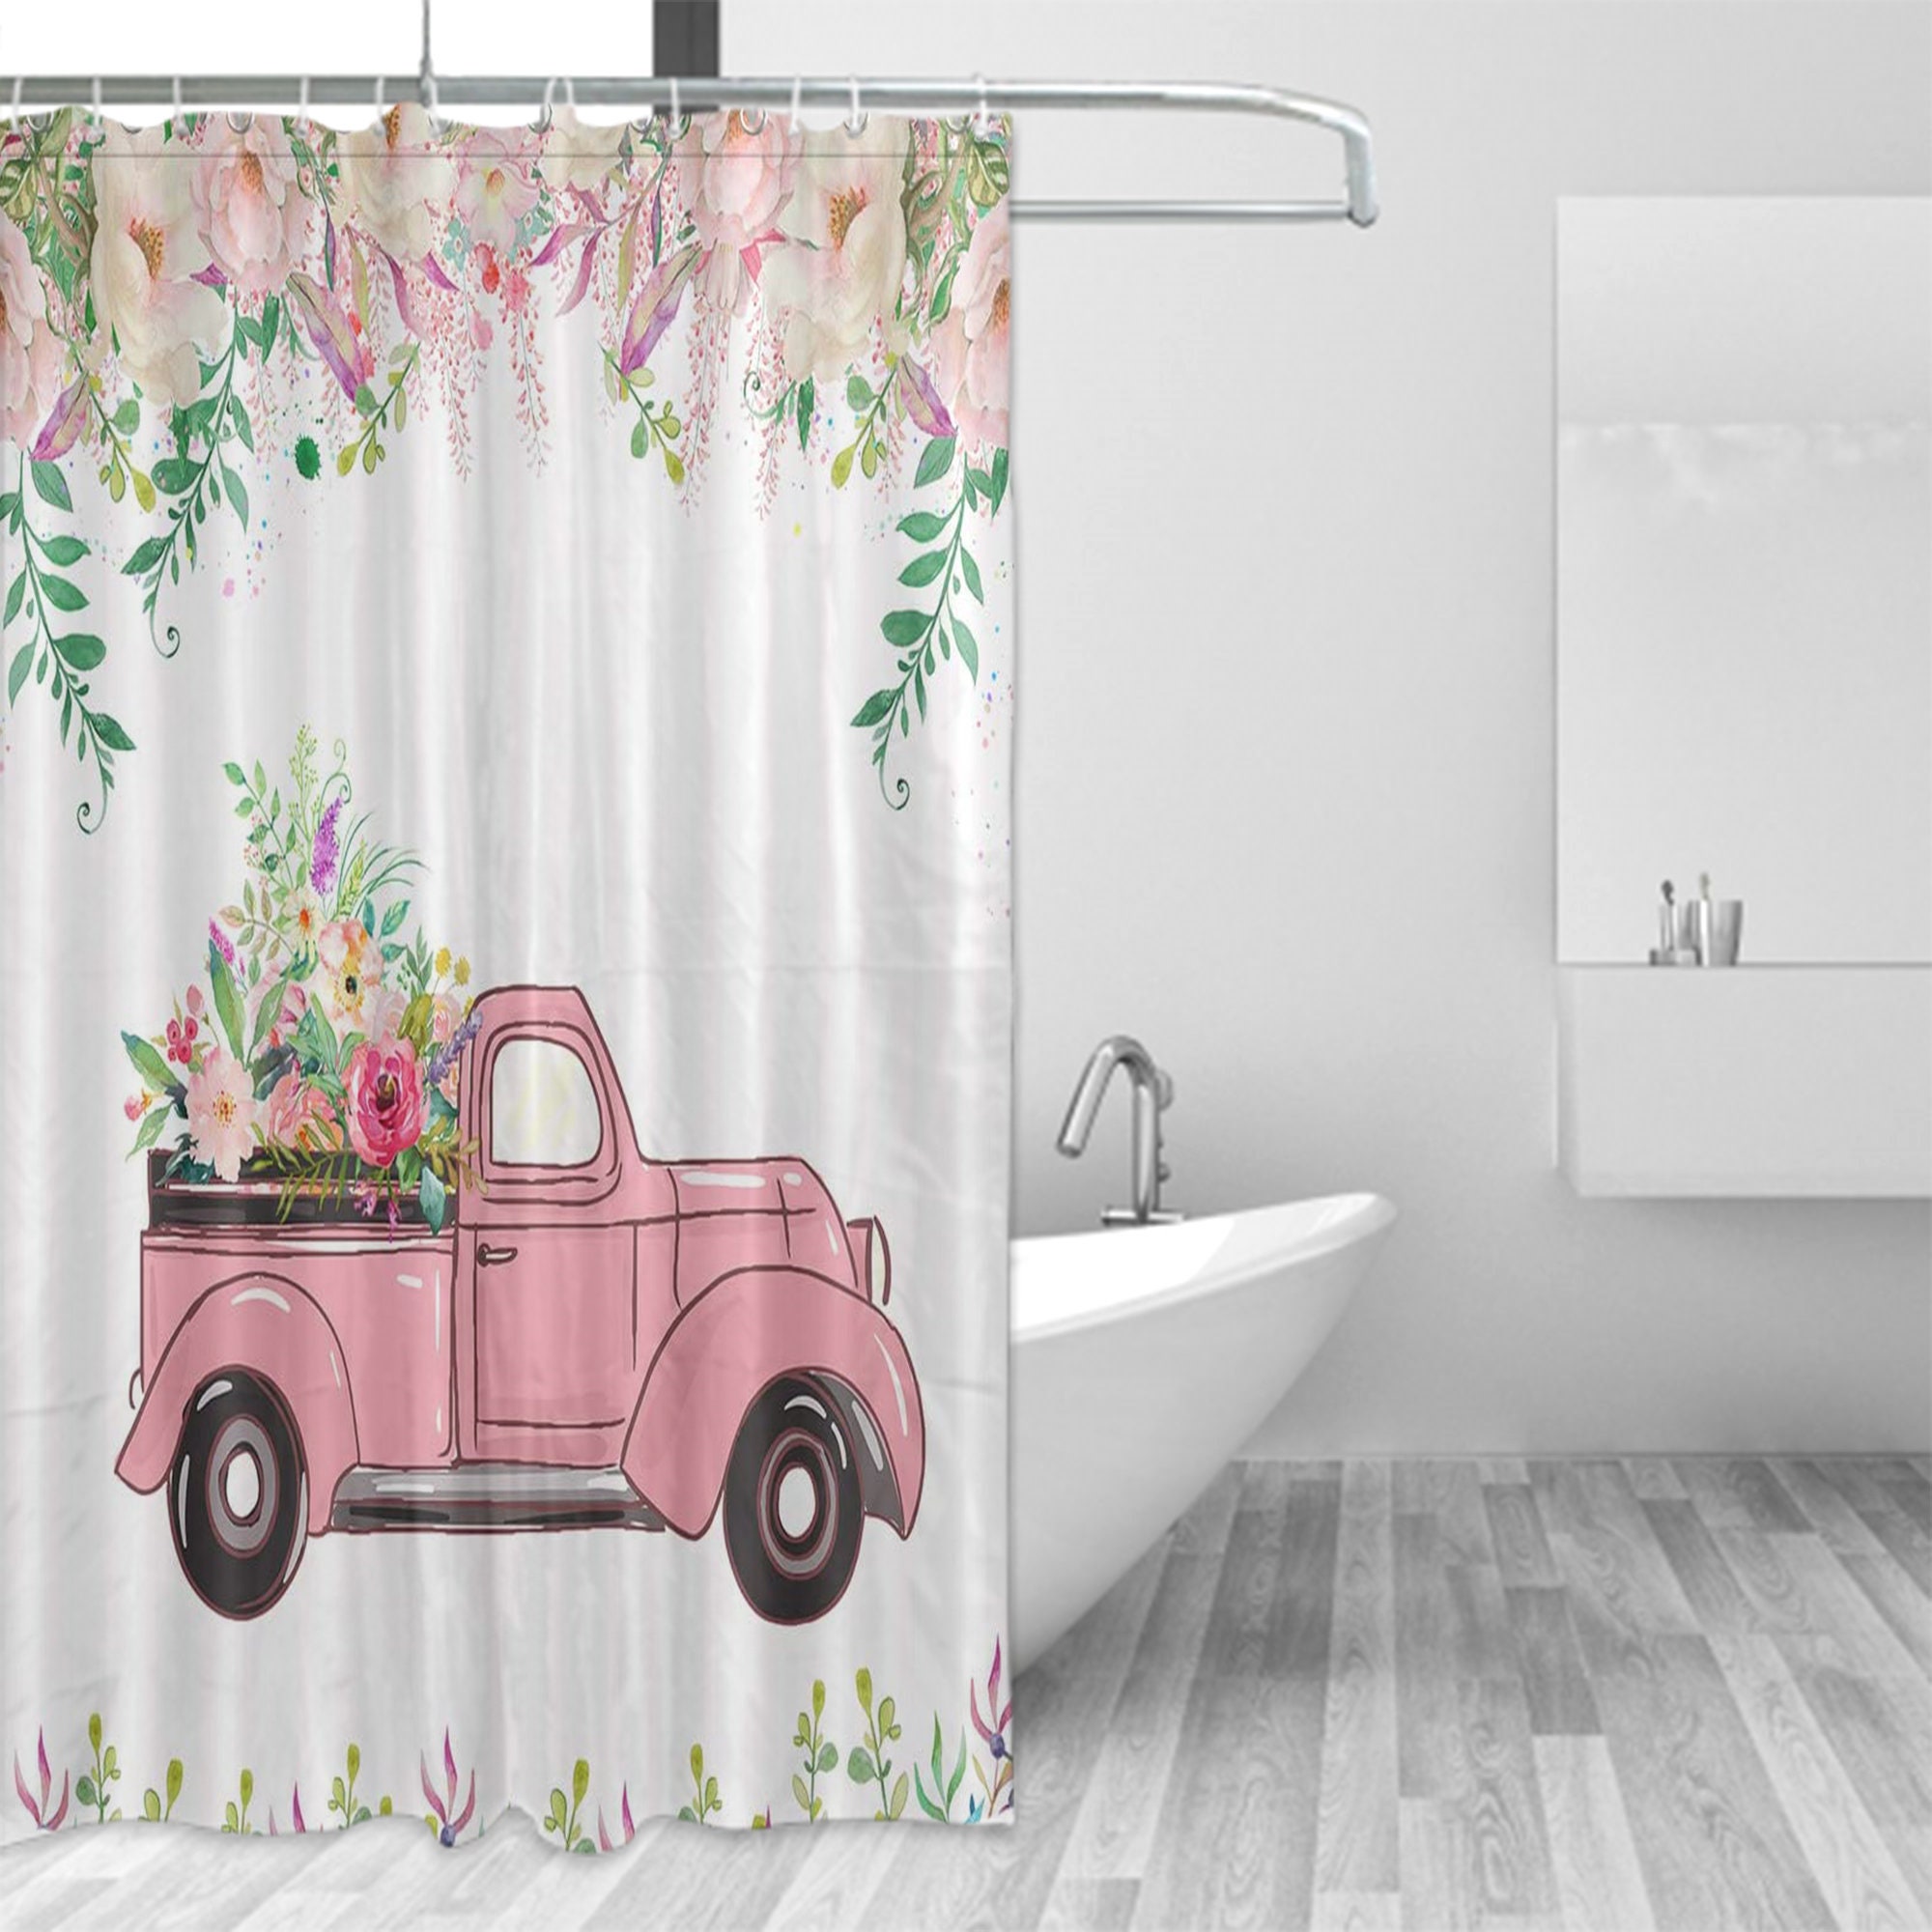 Farmhouse Theme Shower Curtain Vintage Pink Truck With Flowers | Etsy